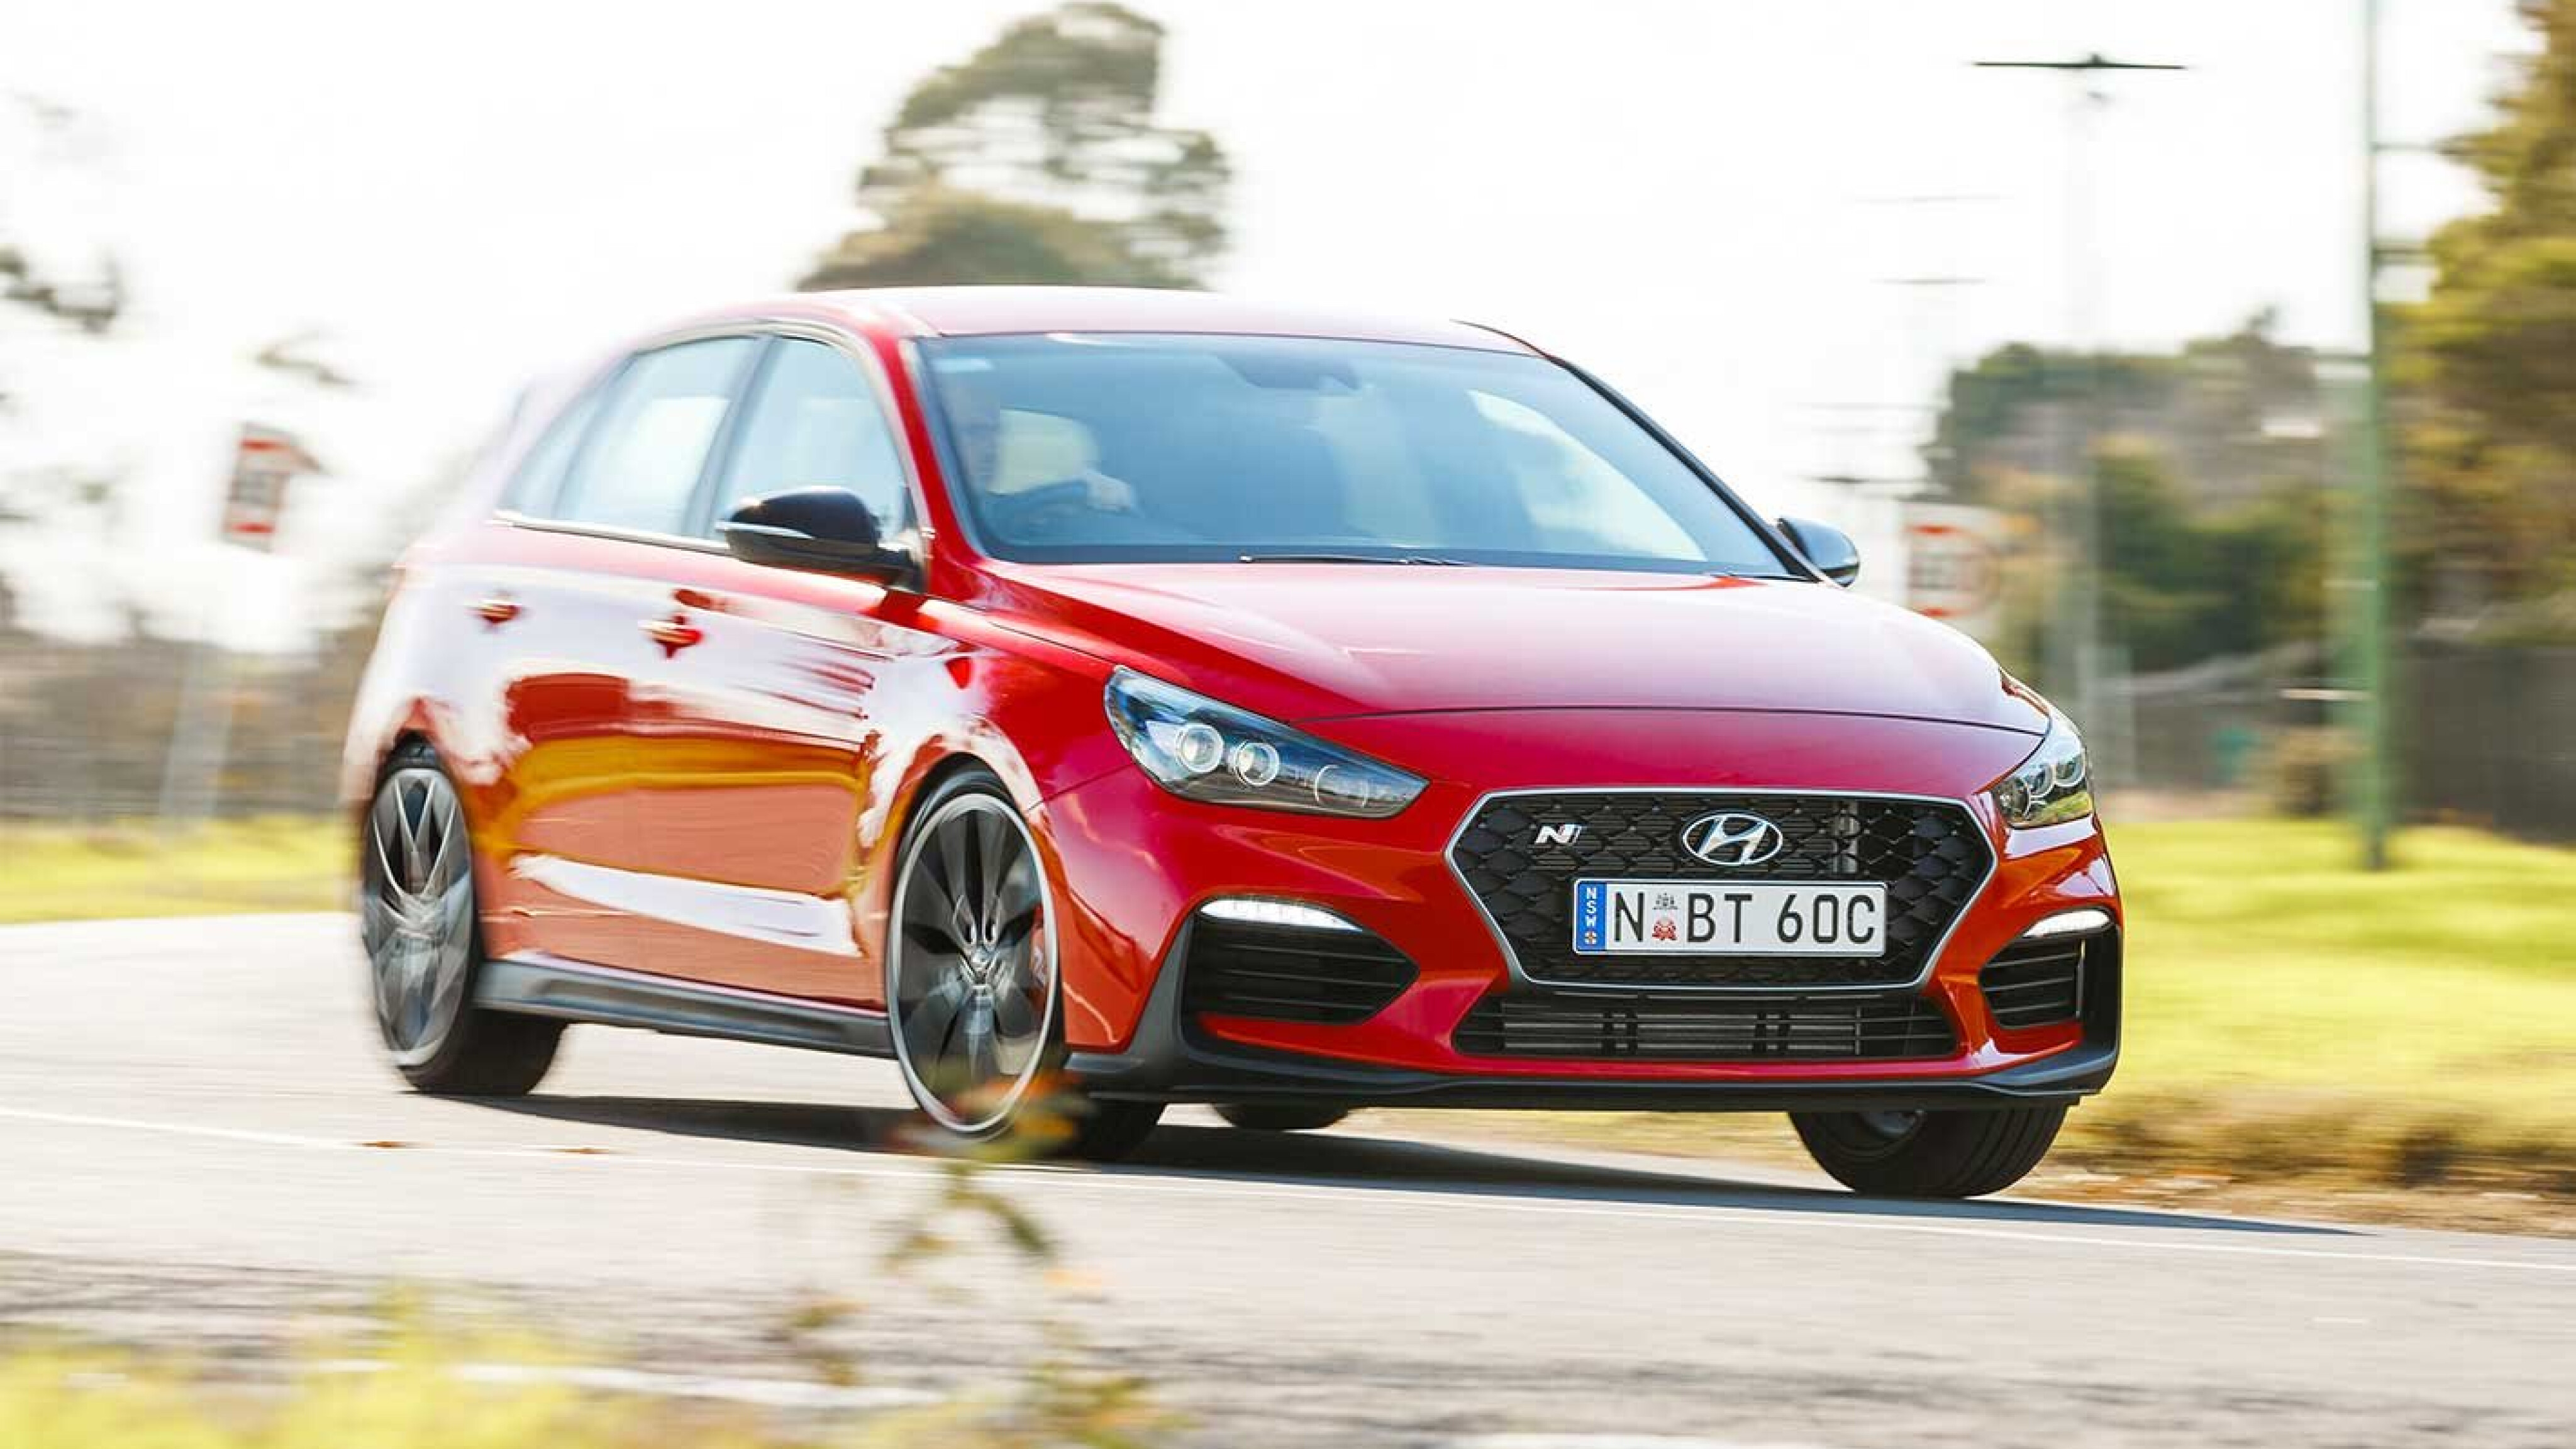 6 Things I've Learned From Two Months Of Hyundai i30 N 'Ownership